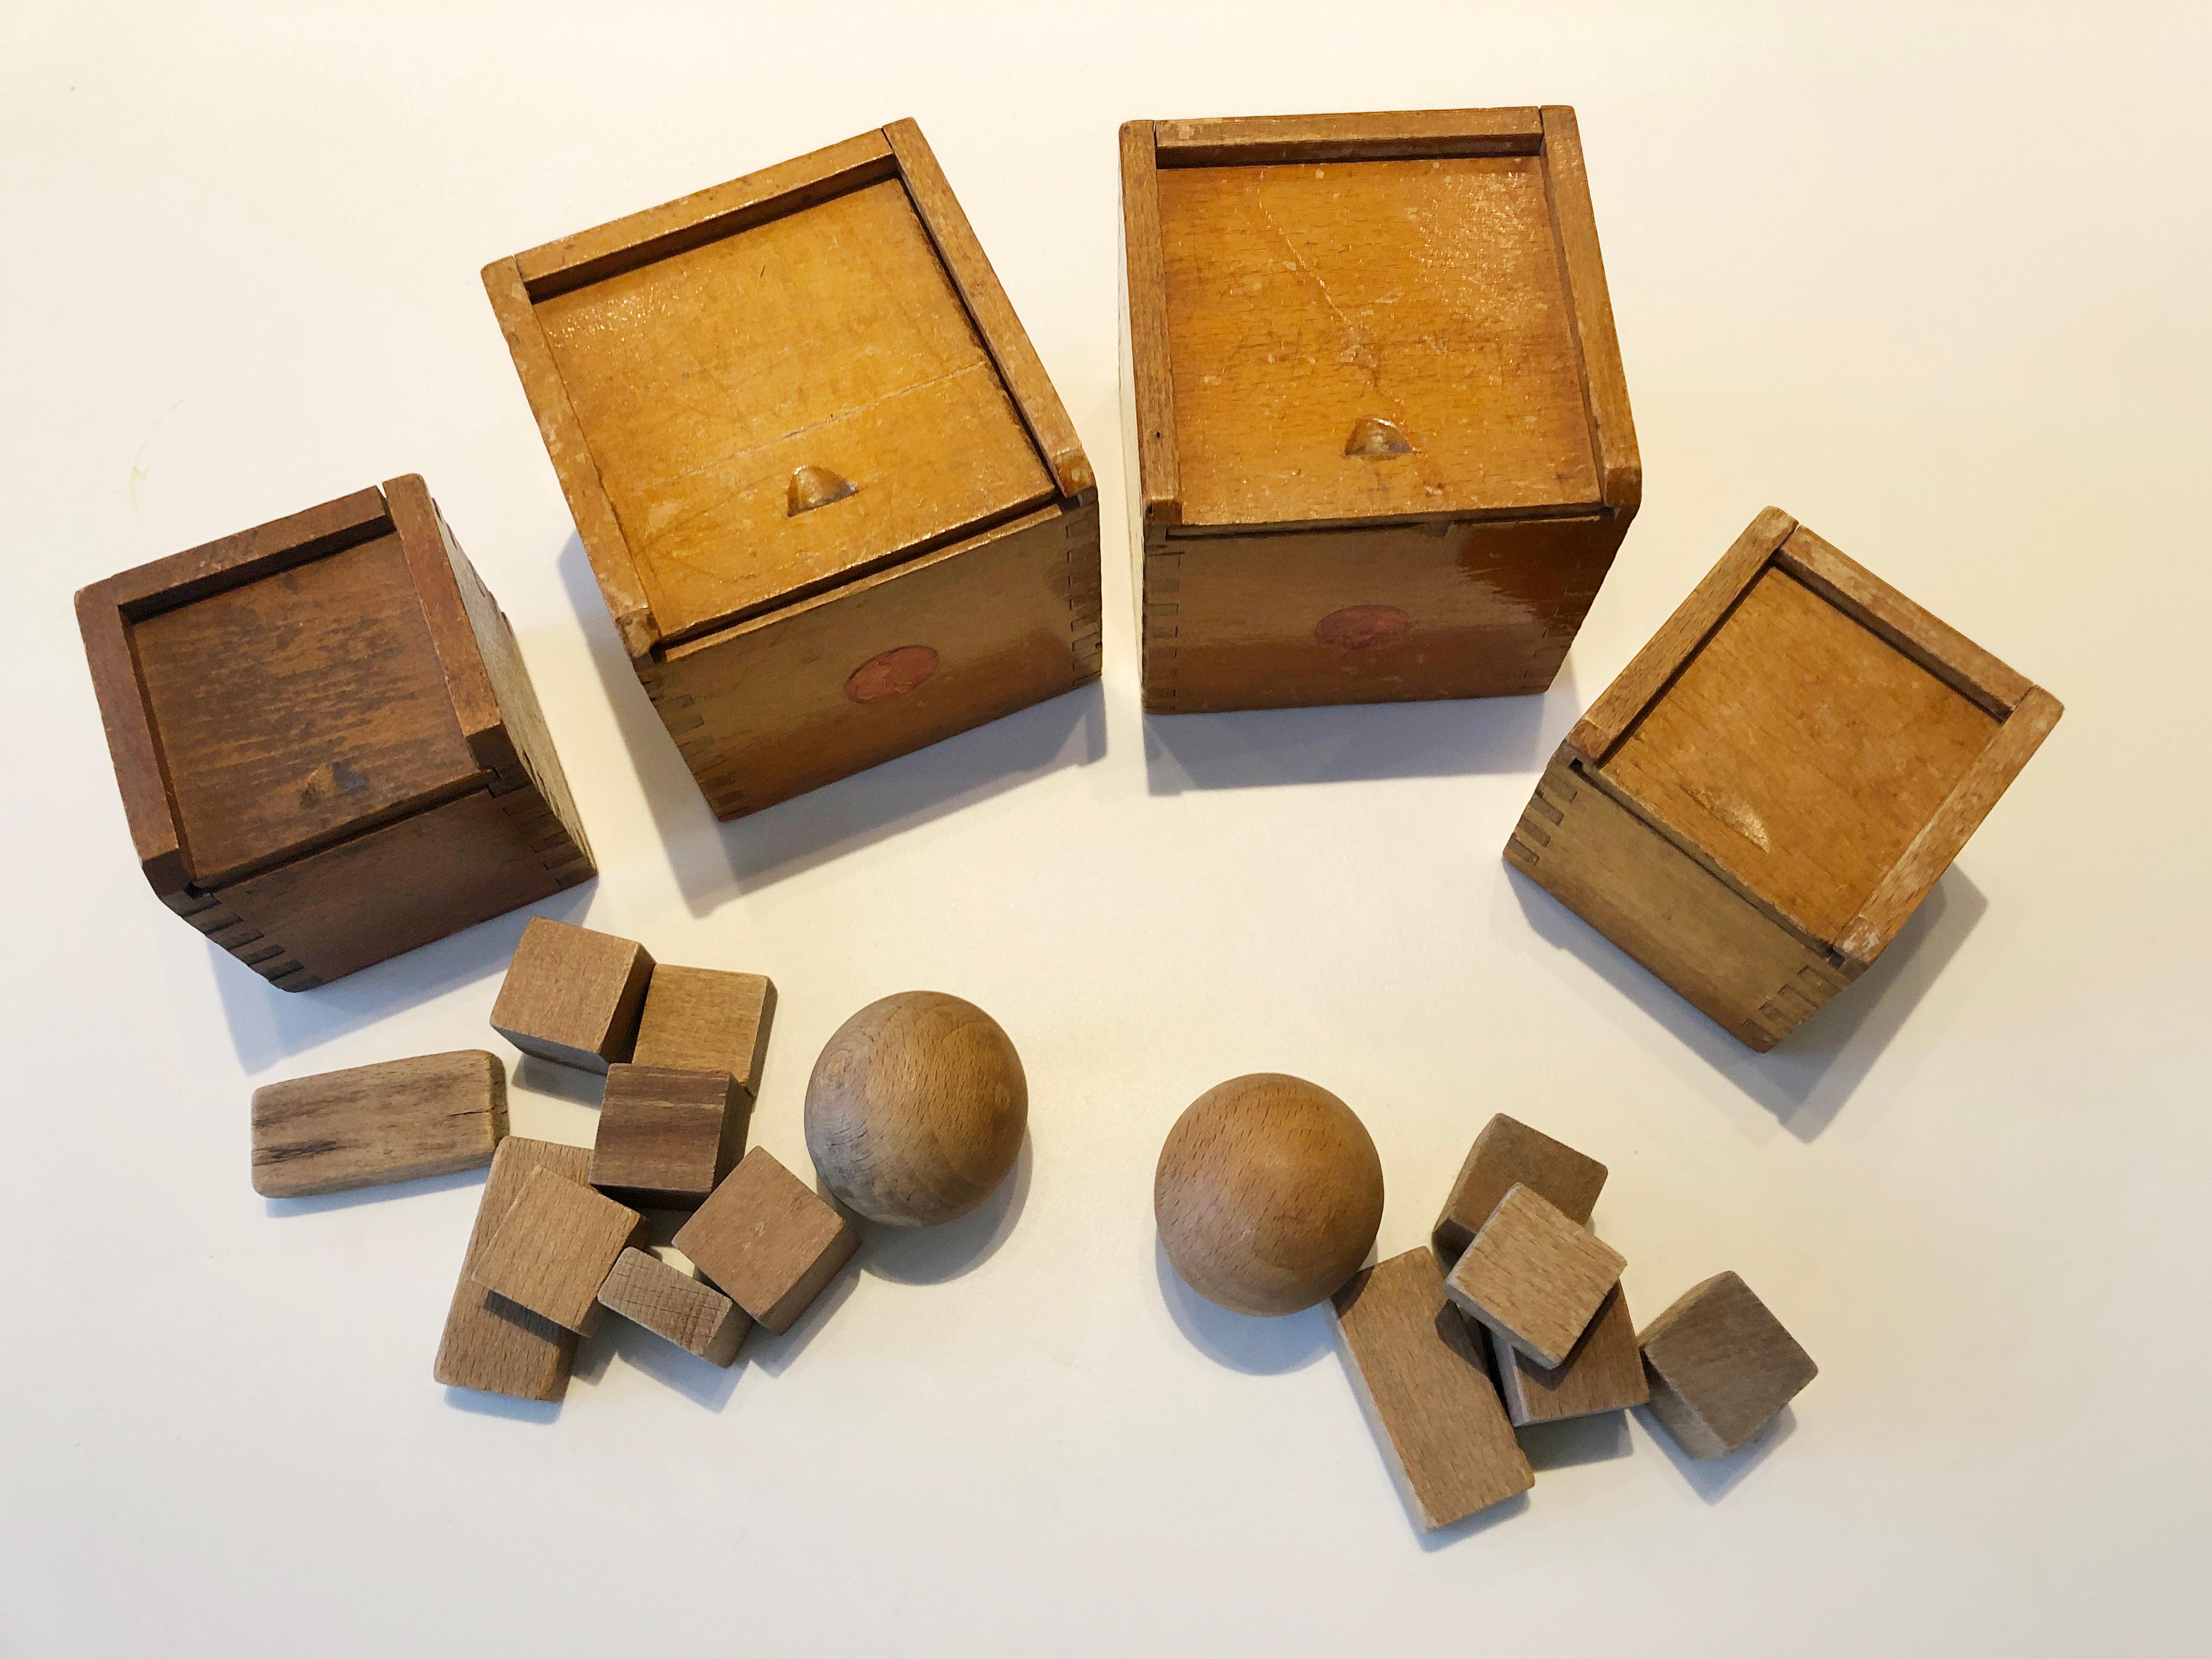 4 Very nice and decorative toy cubes boxes in two sizes. 1920s the Netherlands. Kropholler, Berlage, de Klerk, Kramer, Gerrit Rietveld, Theo van Doesburg, De Stijl.

2 Large boxes 9,5 cm
Wooden ball in every box
2 small boxes 7cm
Comes with set